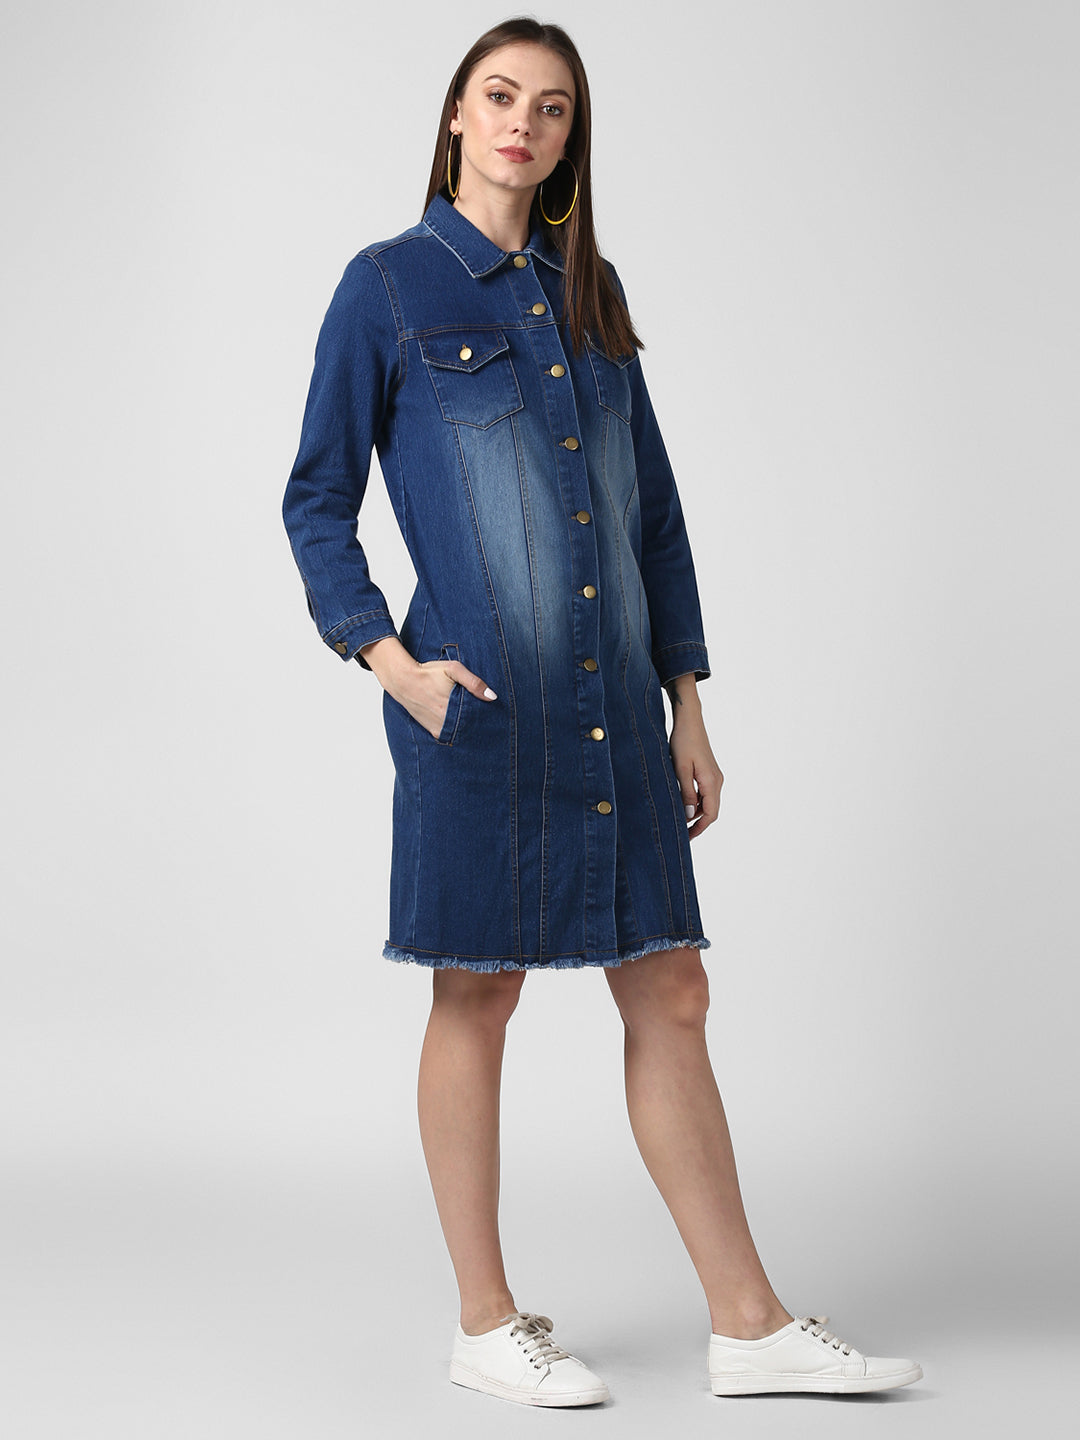 Women's Navy Blue Long Overcoat Style Denim Jacket with Washed effect